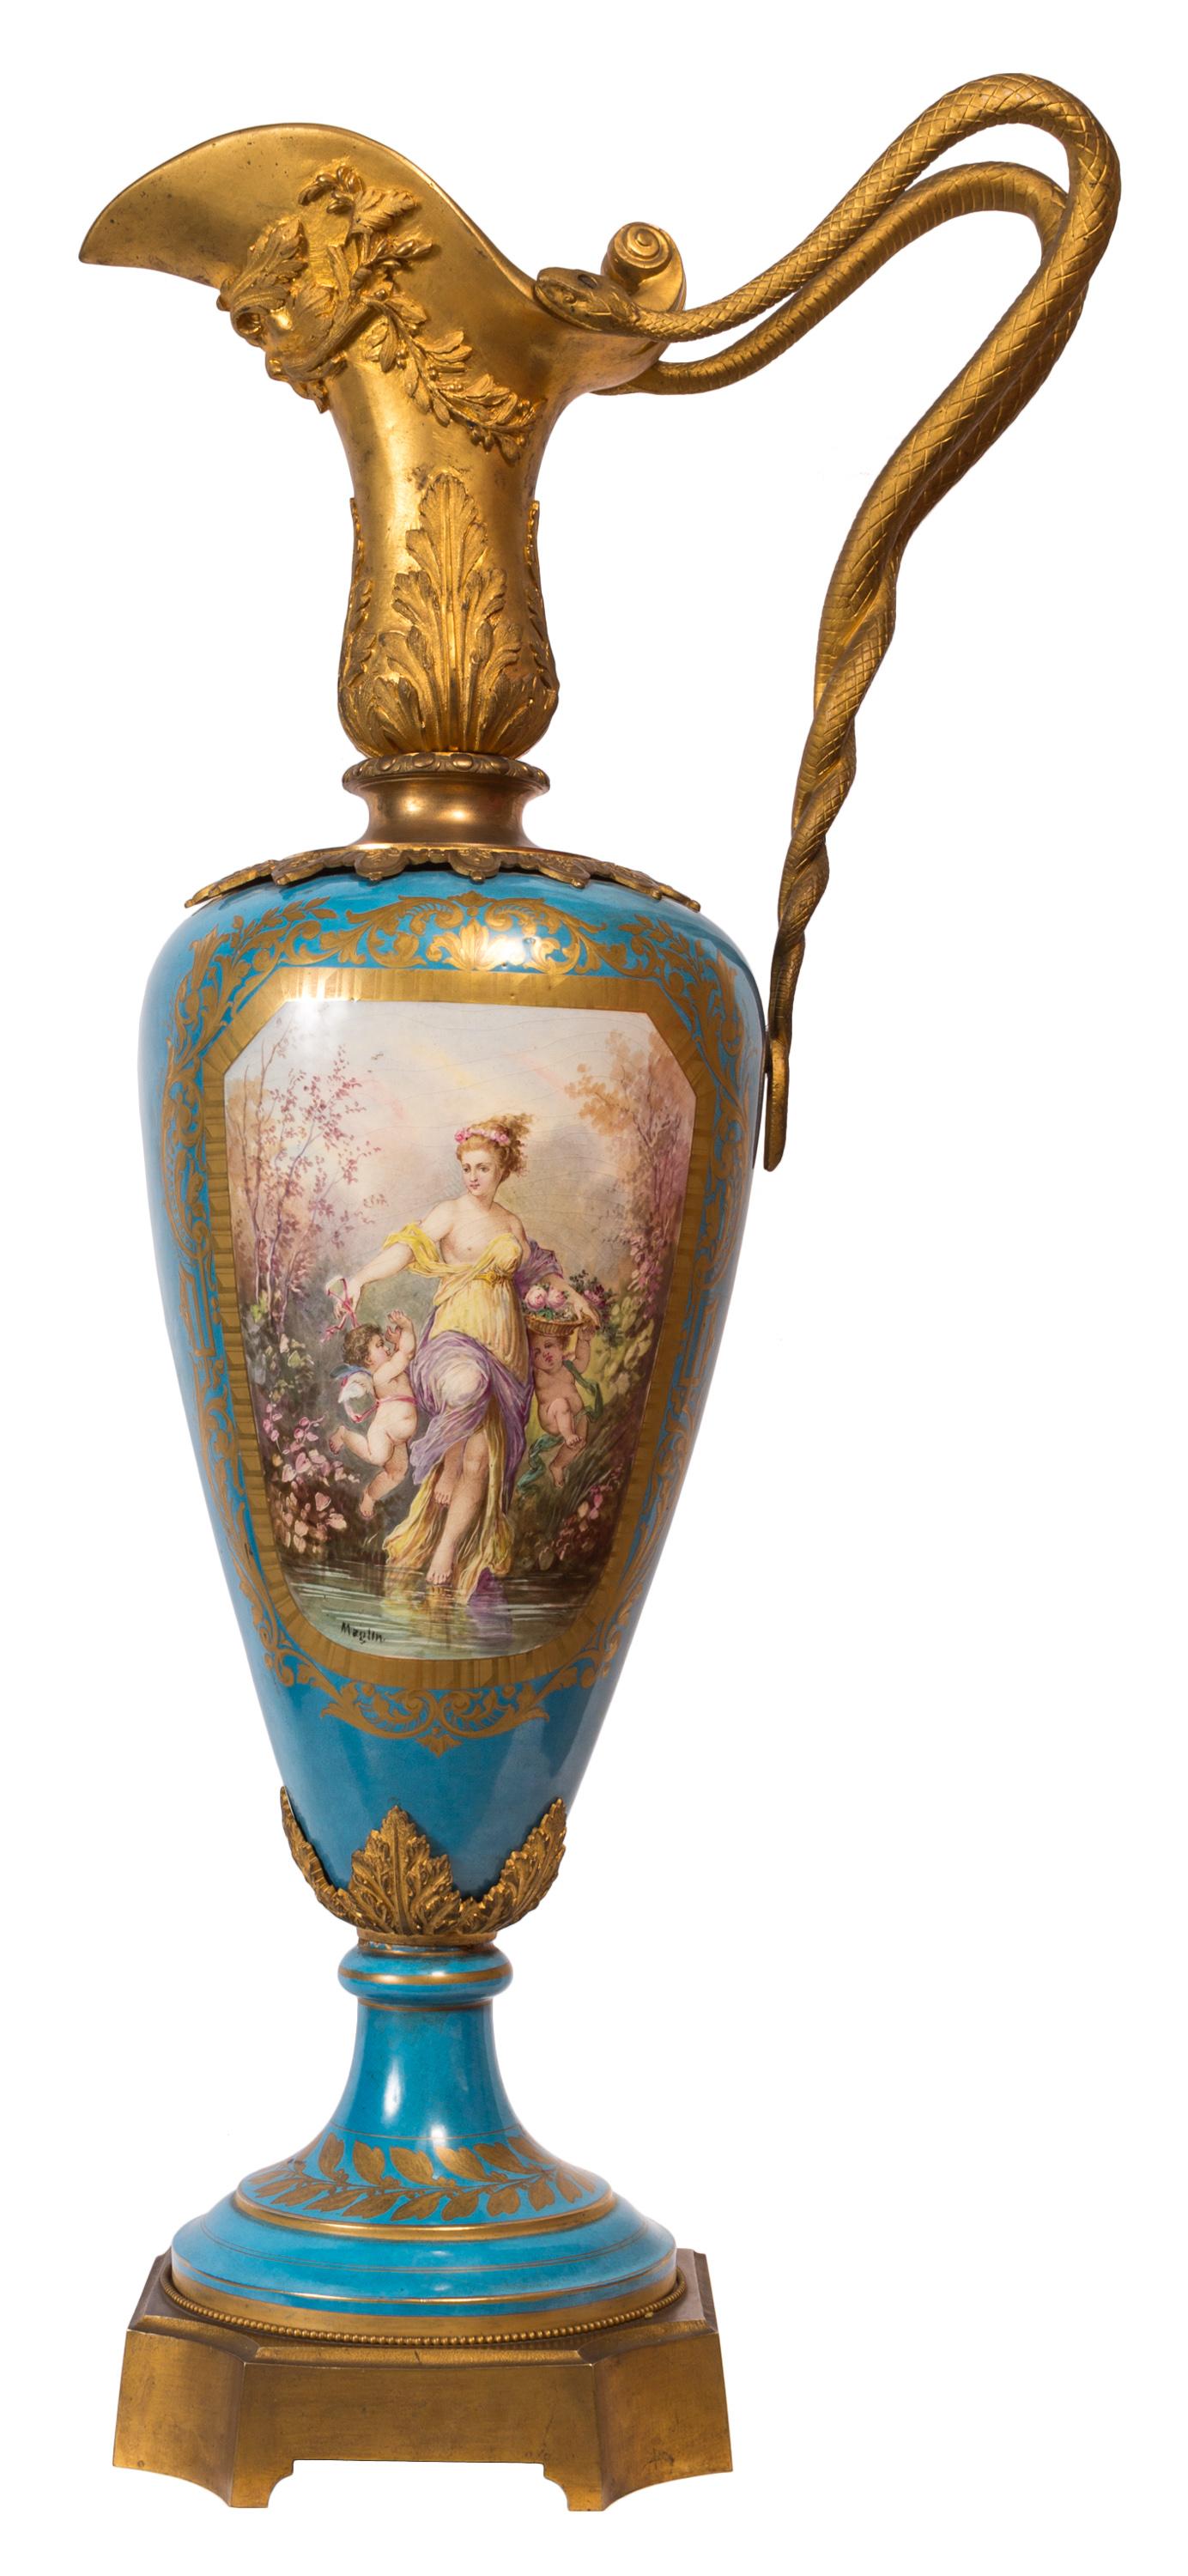 Rococo Revival Pair of Large Sèvres Style Porcelain Vases, Detailed Ormolu, Serpent Handles For Sale